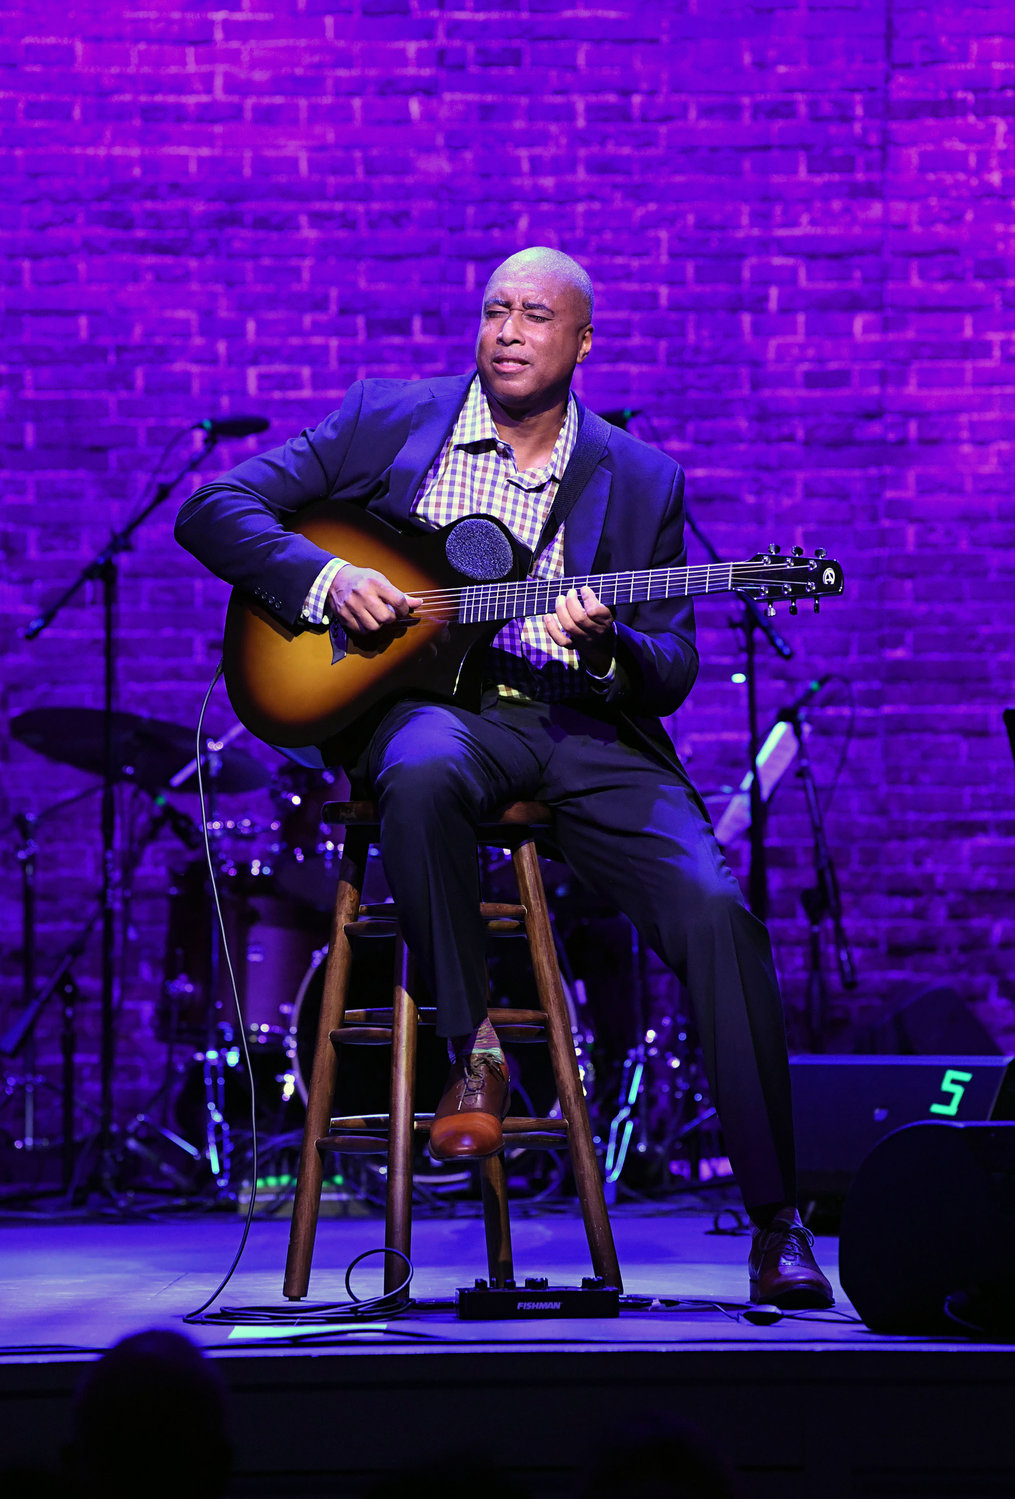 Former New York Yankees great Bernie Williams performs “Take Me Out to the Ball Game” at “Vanessa Williams & Friends: Thankful for Christmas,” a benefit performance for The Sheen Center for Thought & Culture in Manhattan Nov. 18.